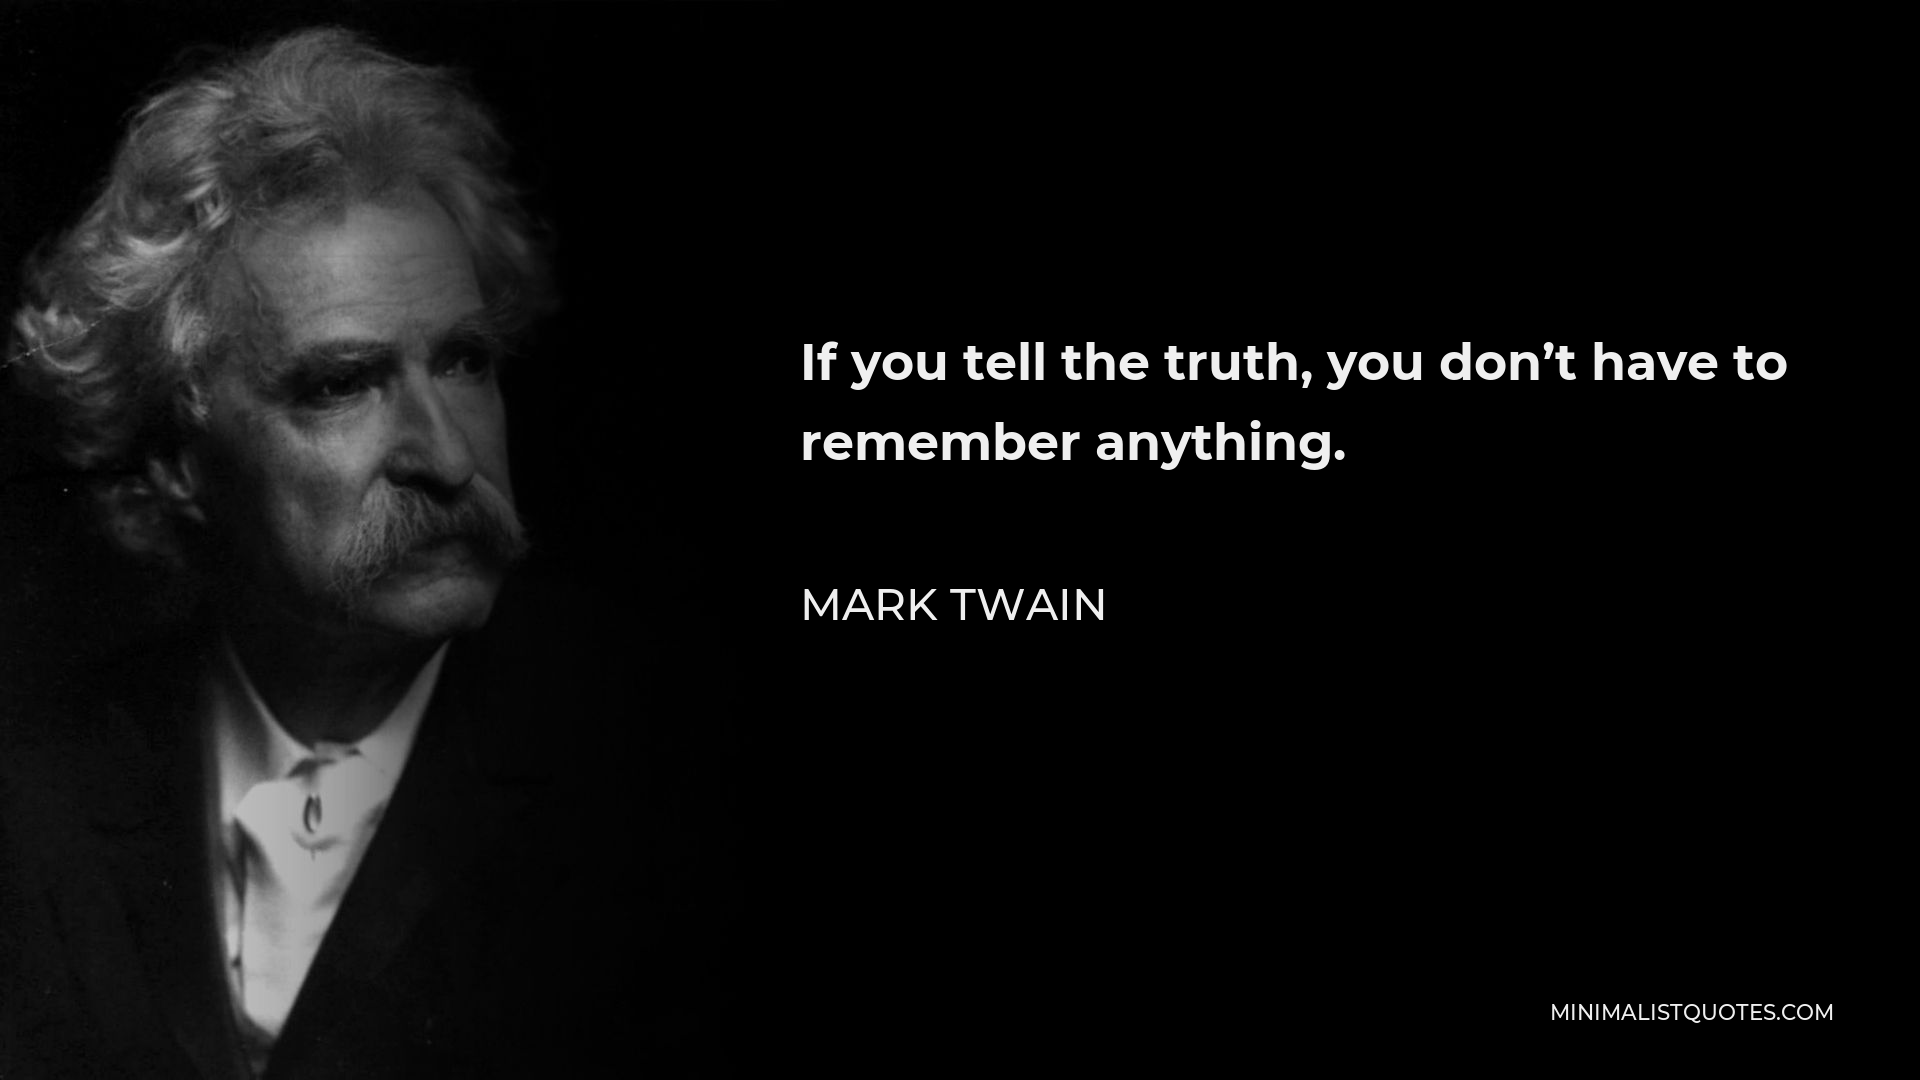 Mark Twain Quote - If you tell the truth, you don’t have to remember anything.